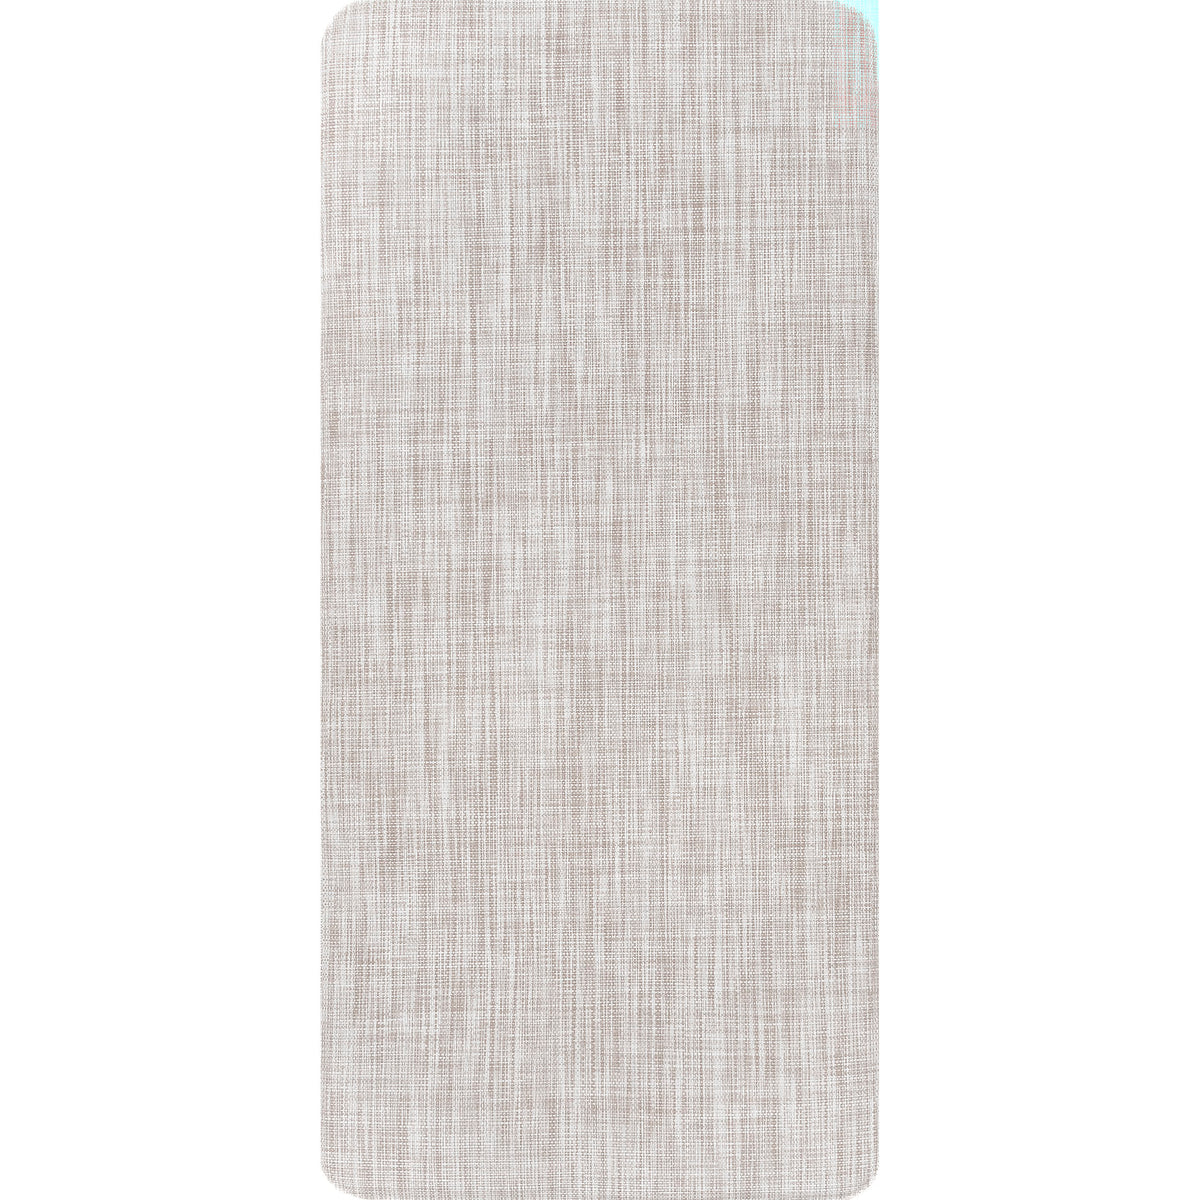 nuLOOM Casual Anti Fatigue Kitchen or Laundry Room Comfort Mat, 18 inch x 30 inch, Off White